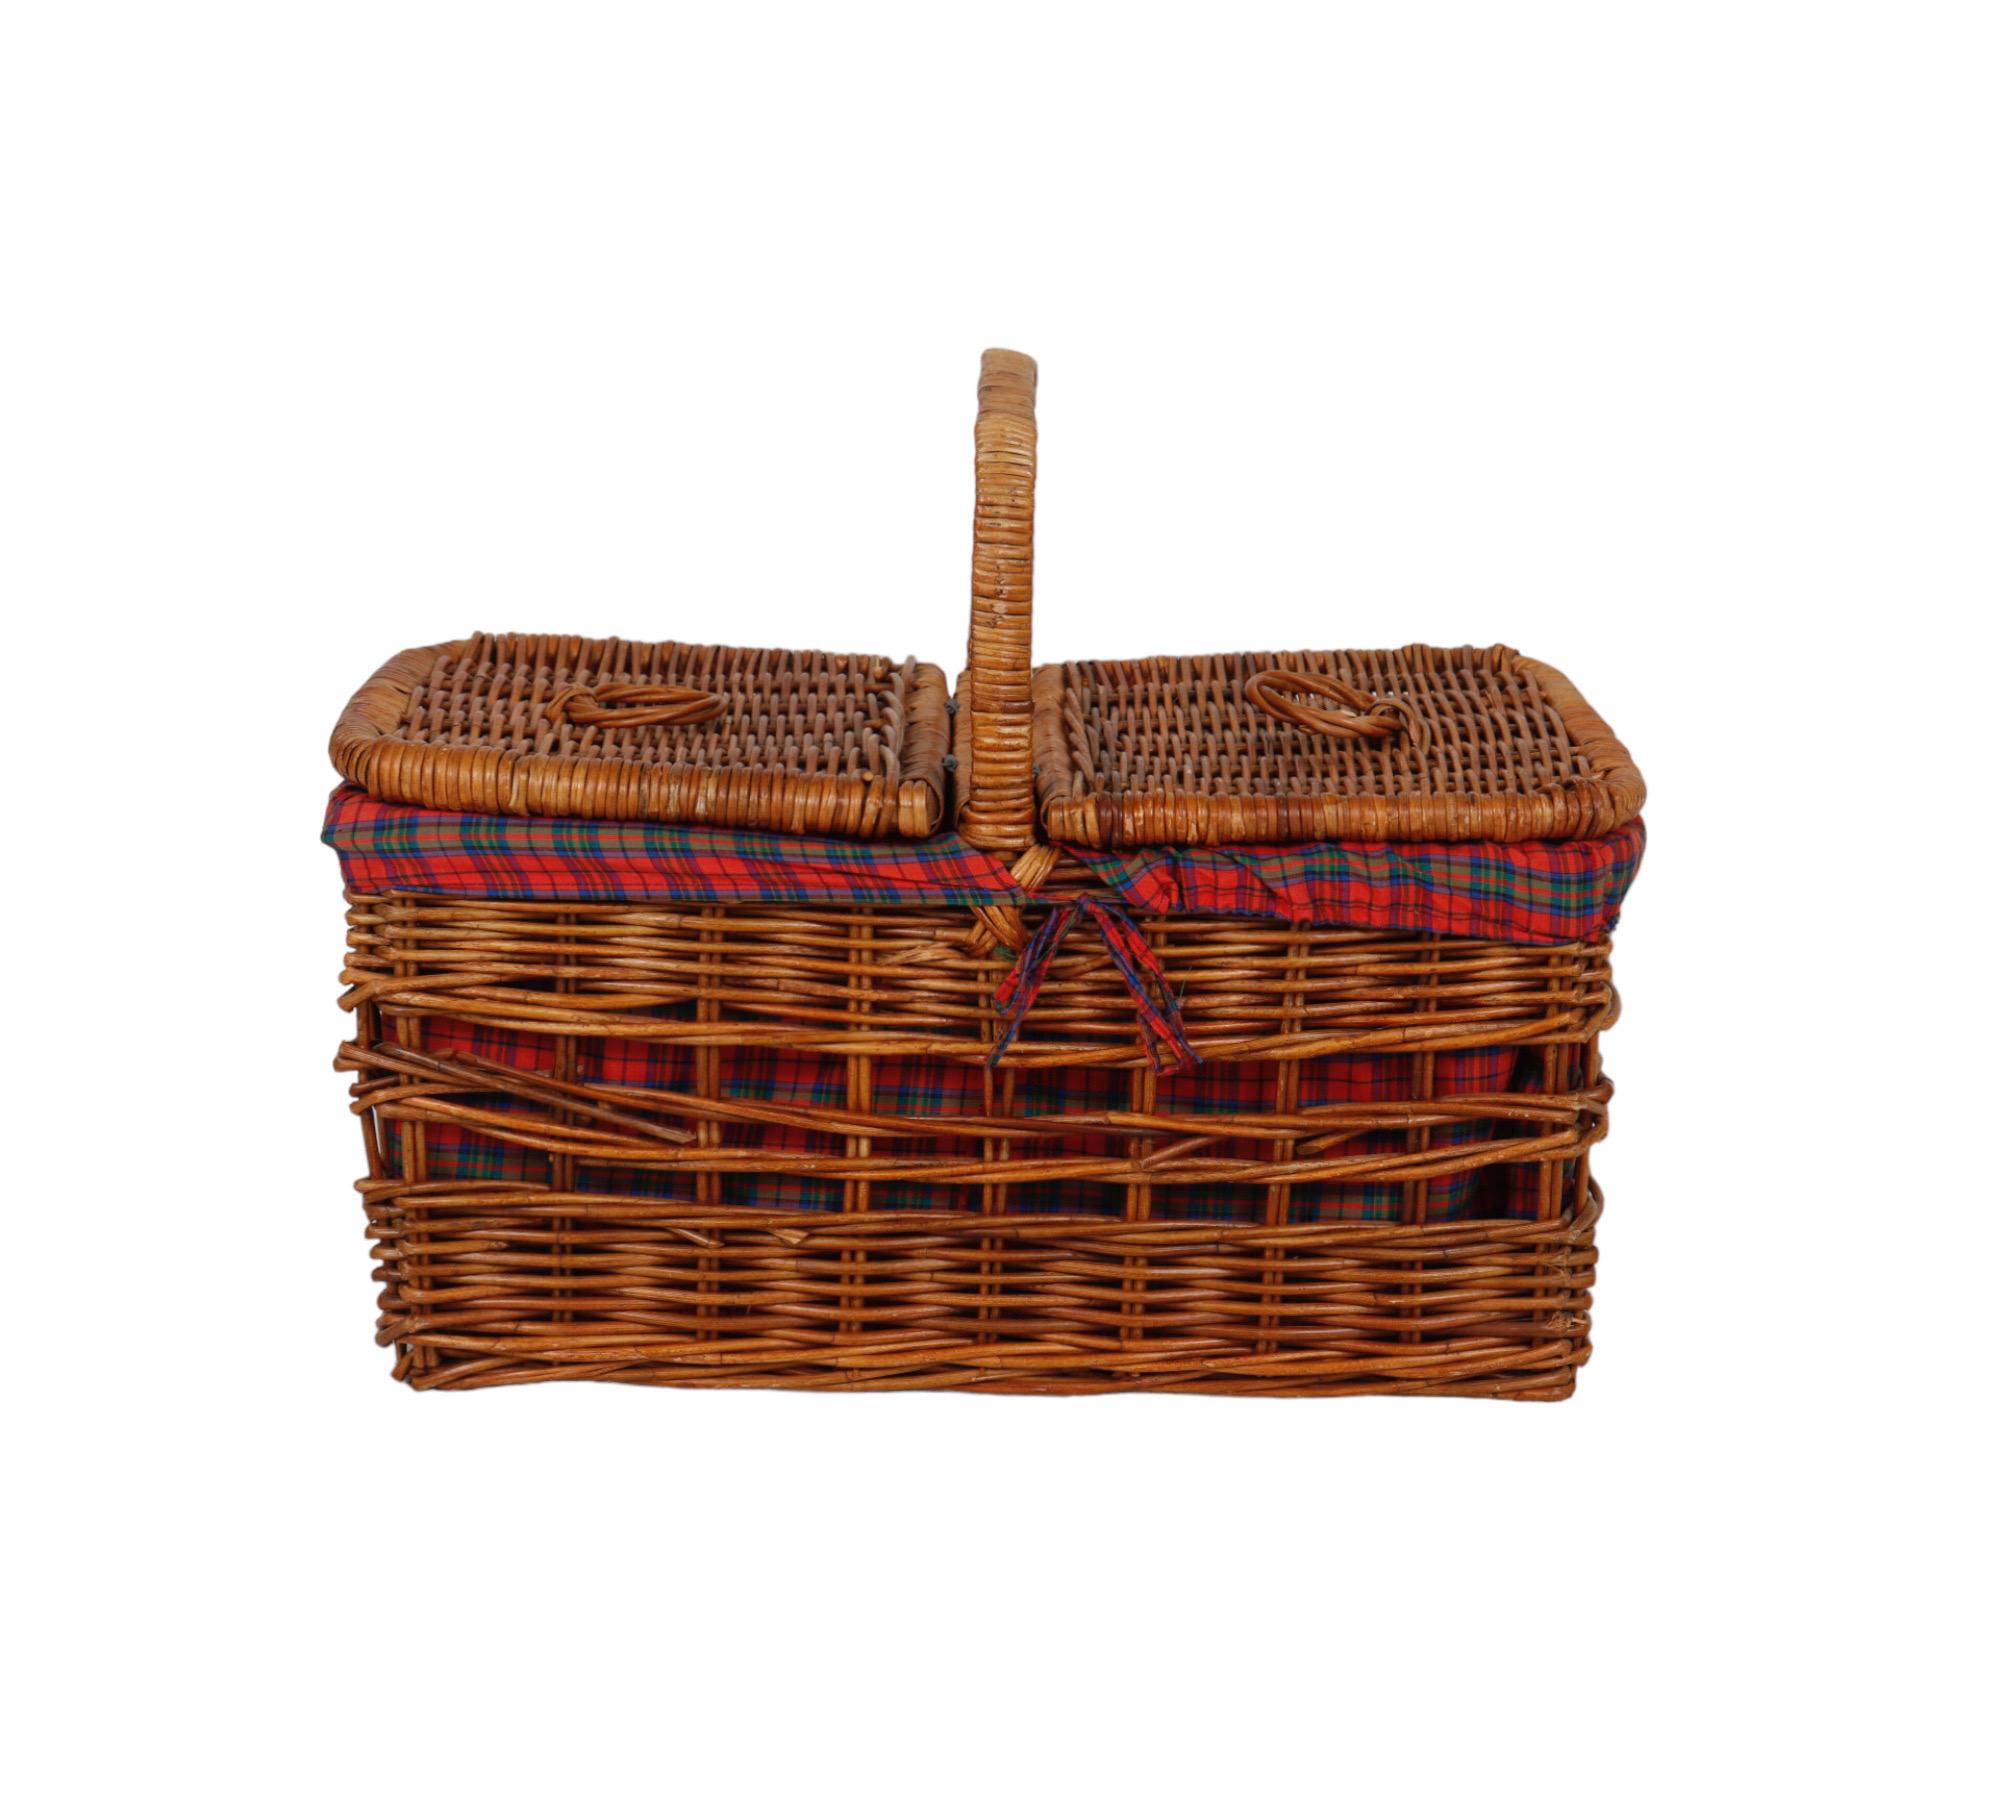 A large wicker woven rattan picnic hamper basket, with a plaid cloth lining and two handles. Two open weave bands decorate the sides allowing the pattern of the fabric inside to be seen. On top a single handle divides two lids, hinged at the center,